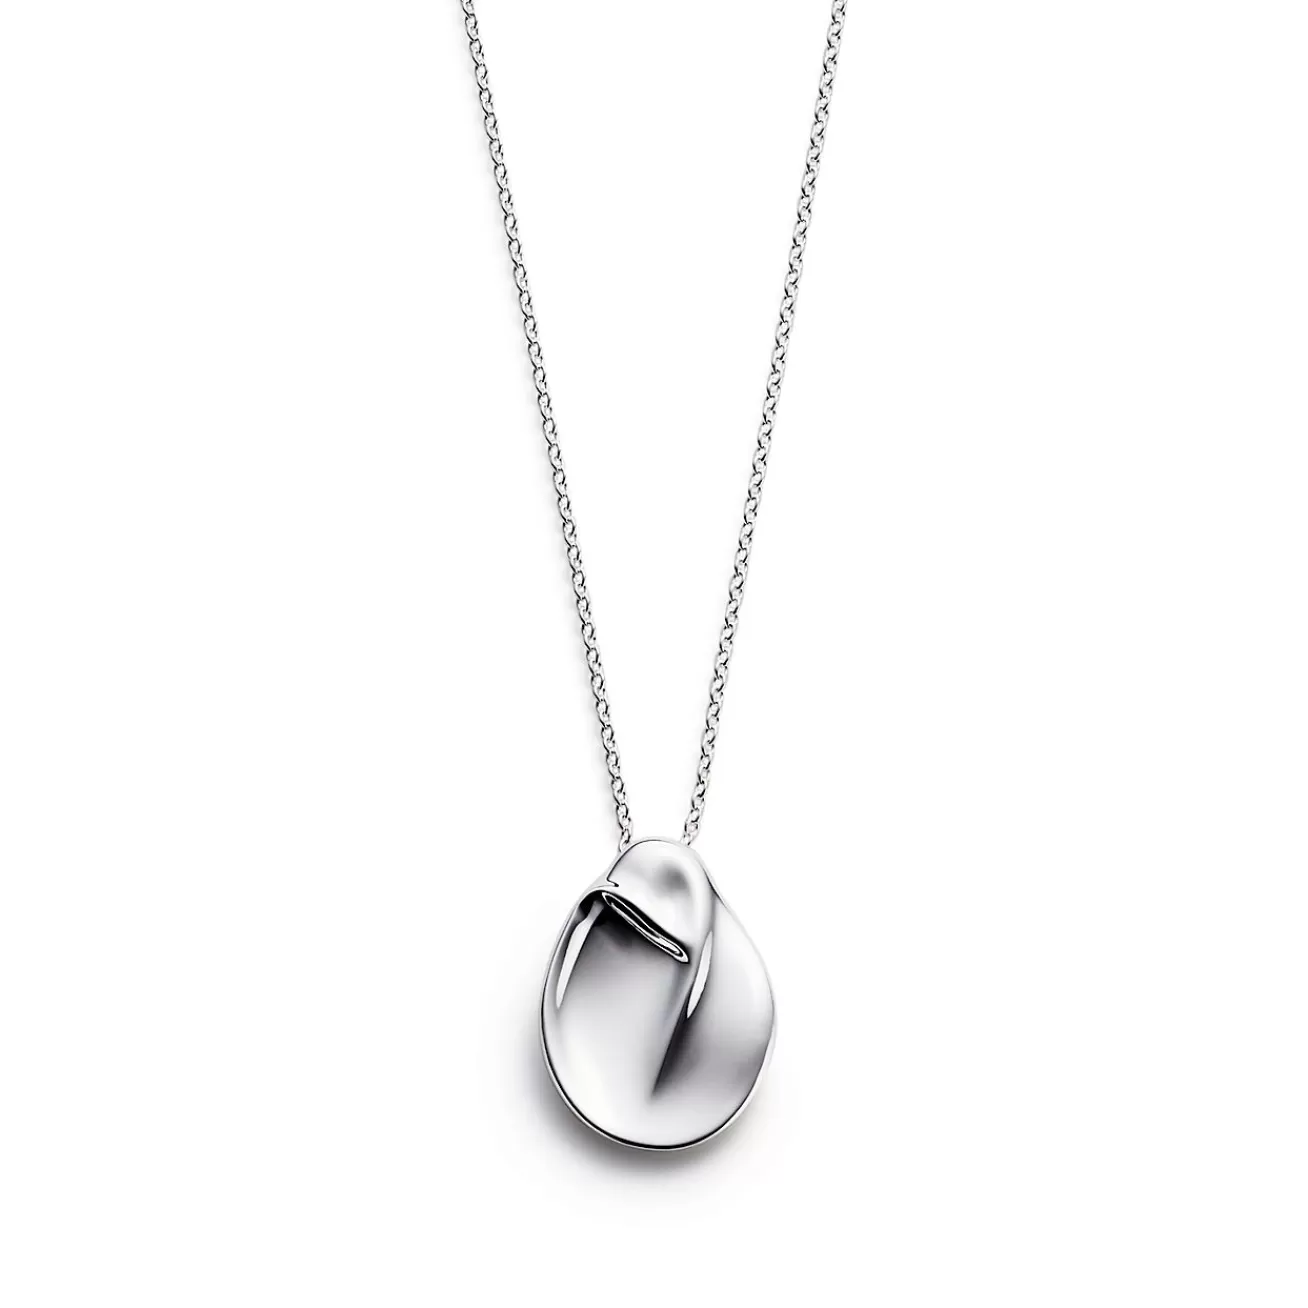 Tiffany & Co. Elsa Peretti® Madonna pendant in sterling silver, 20 mm wide. | ^ Necklaces & Pendants | Sterling Silver Jewelry